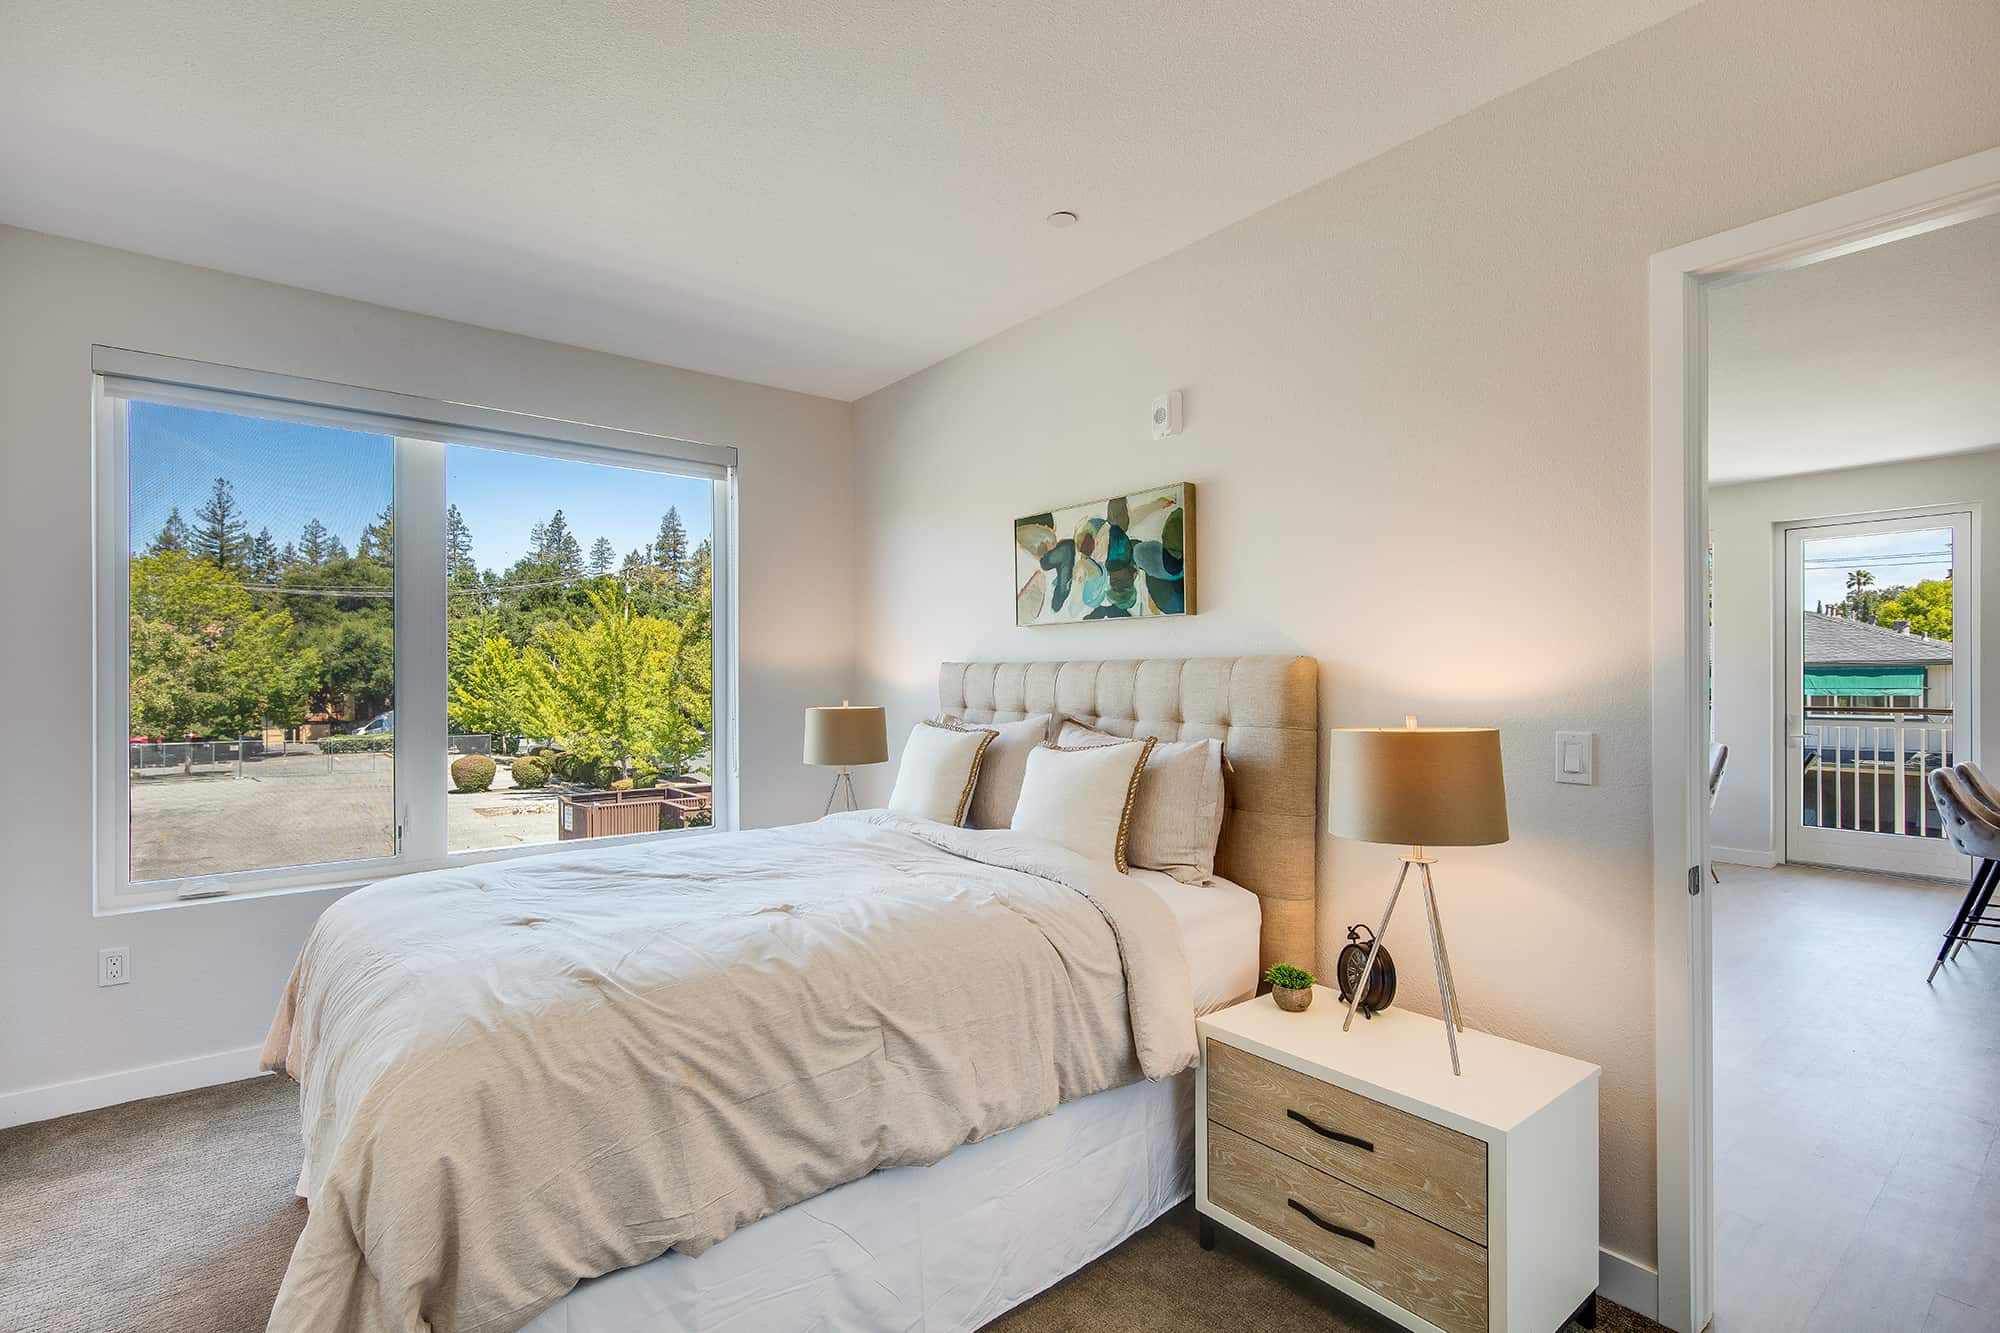 Two Bedroom Apartments in Menlo Park, CA - Realm - Bedroom with Large Window and Nightstand